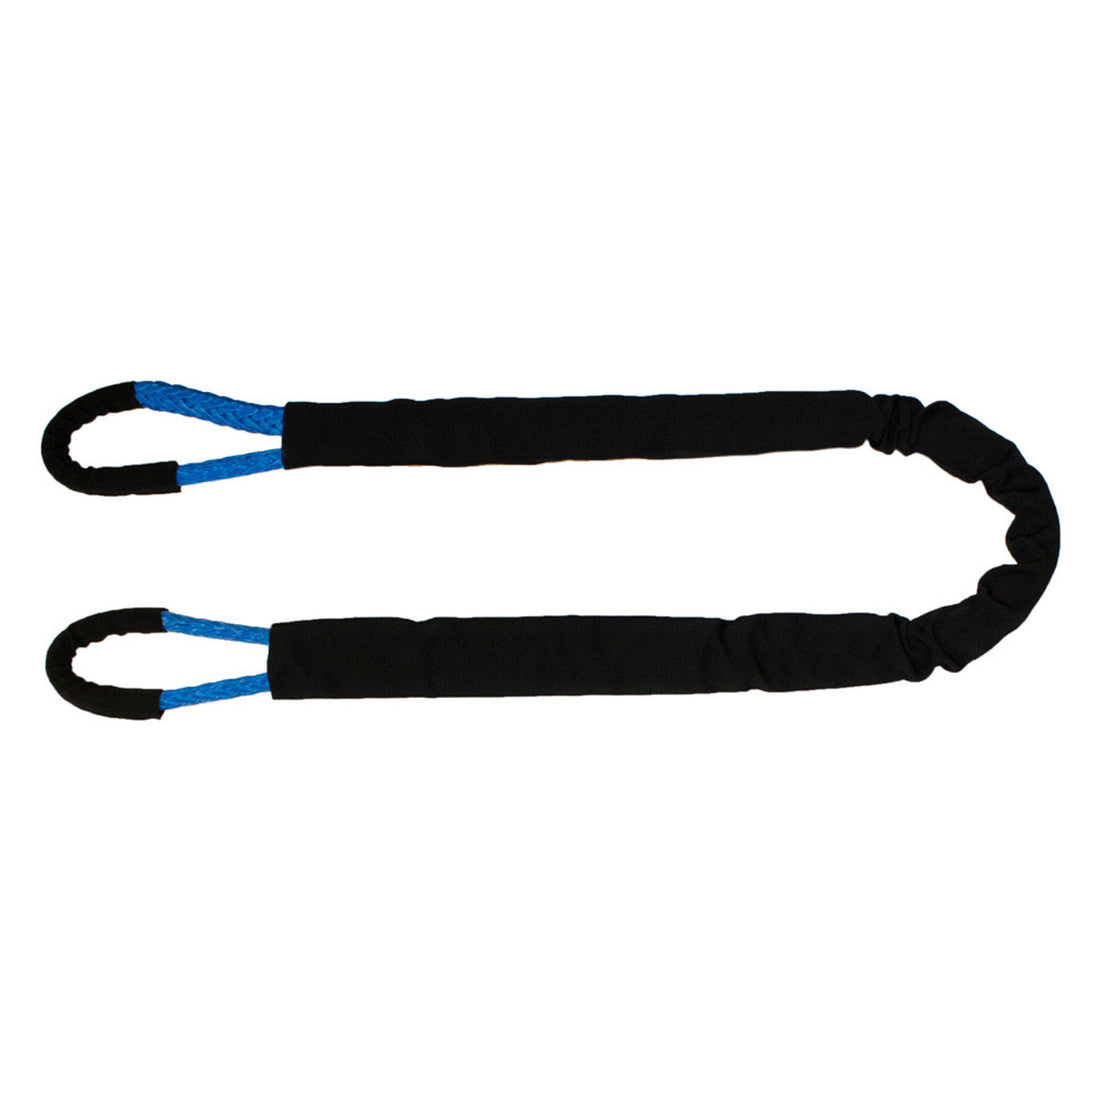 5/8" X 8' Endless Synthetic Super Sling